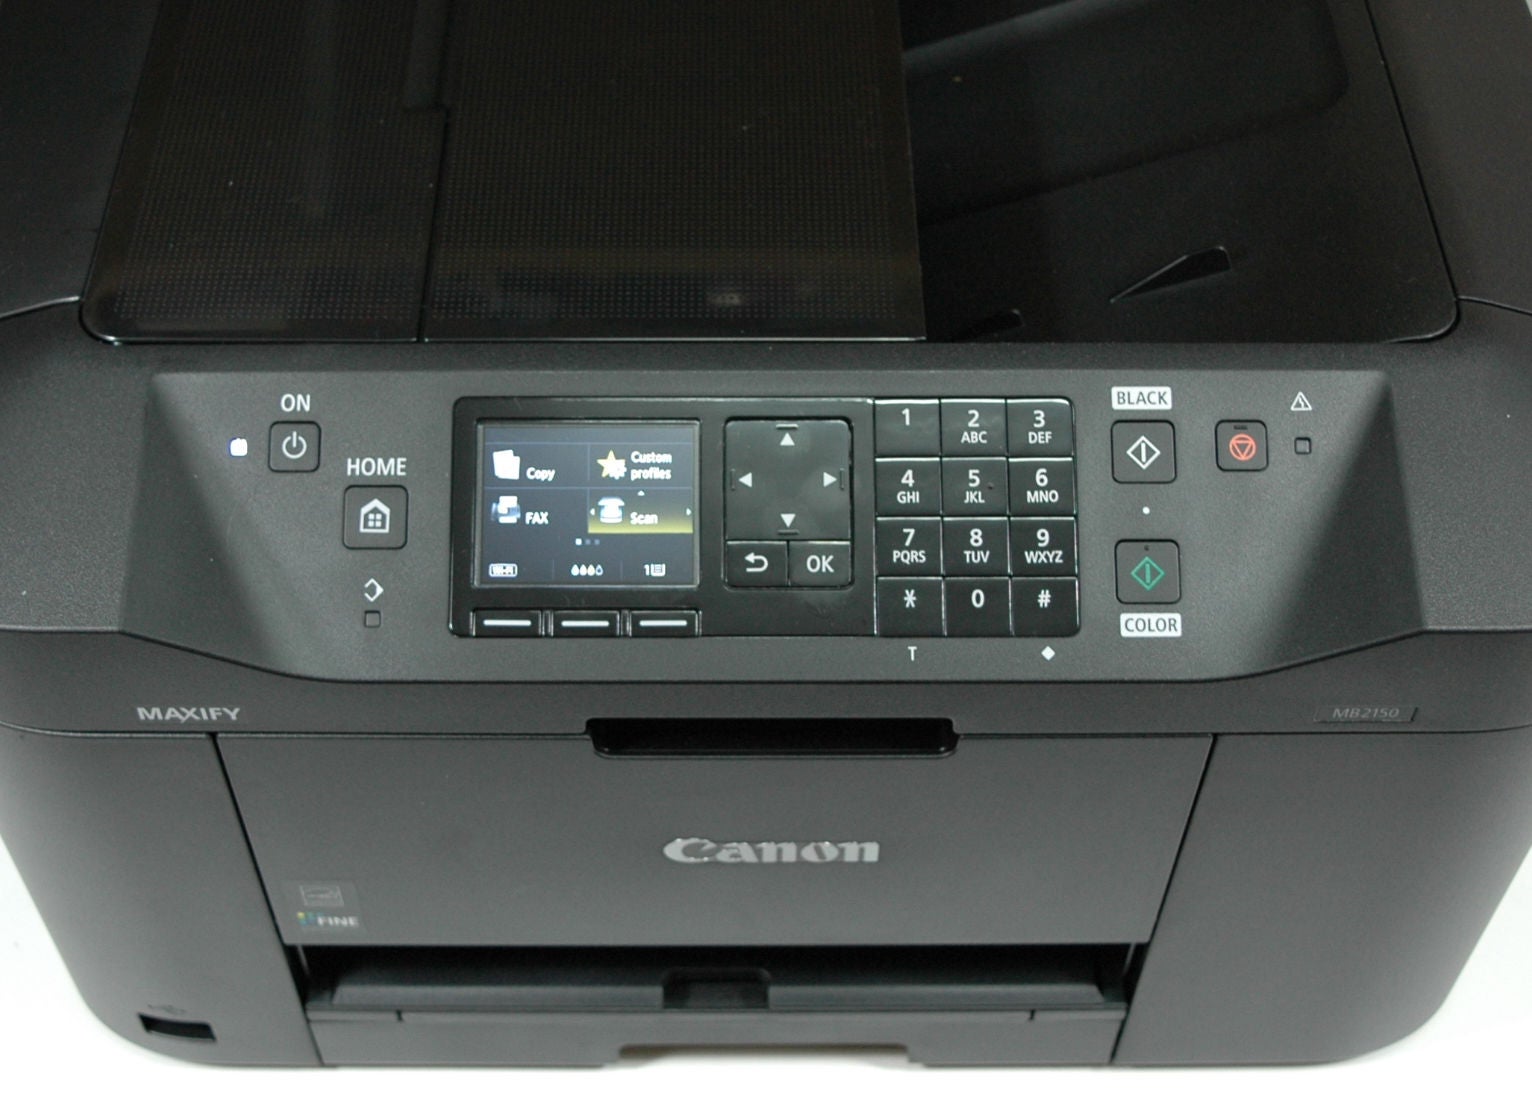 Canon MAXIFY MB2150 multifunction printer control panel close-up.